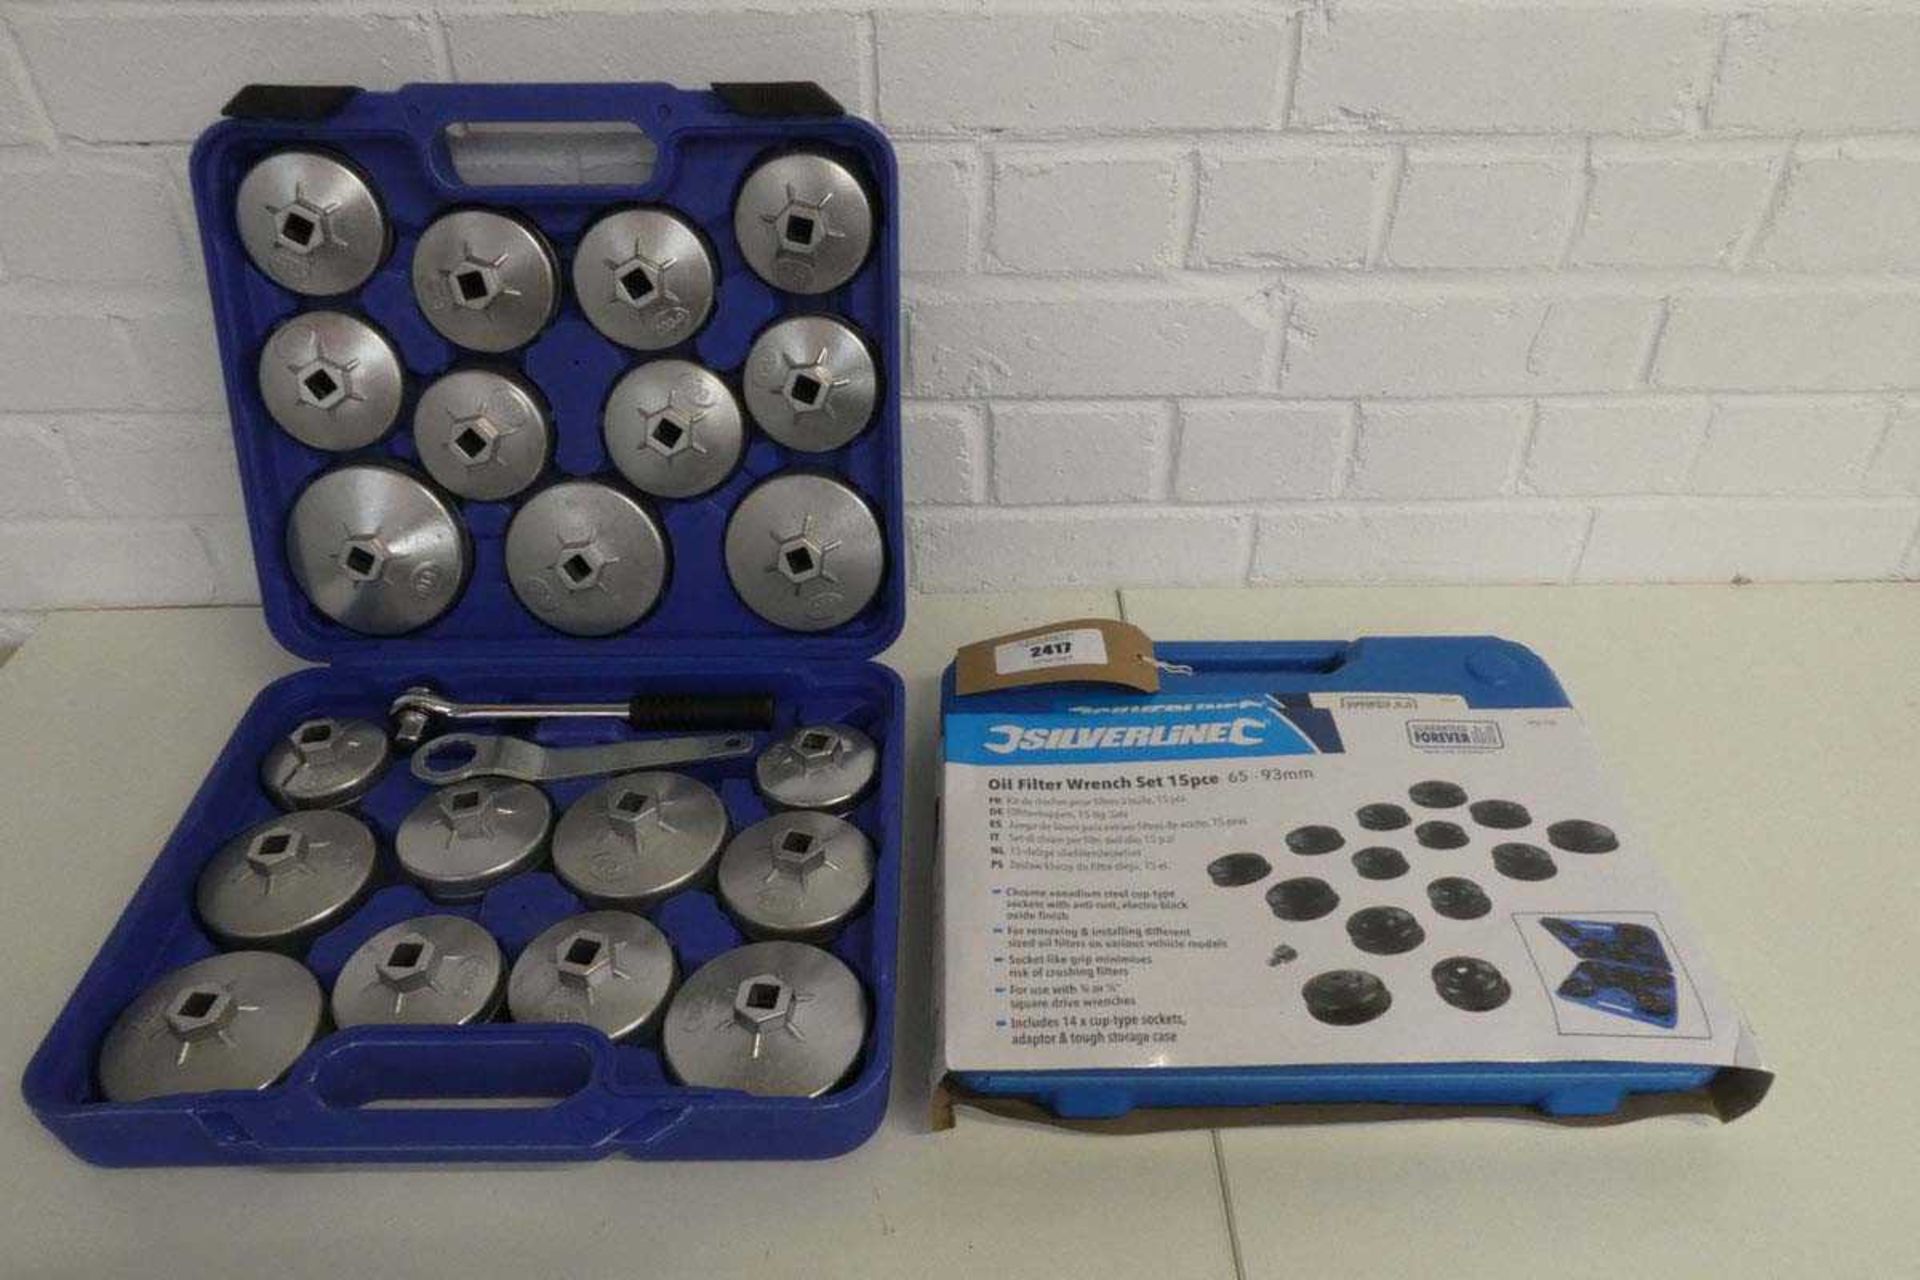 +VAT Cased Silver Line 15 piece oil filter wrench set together with a cased 23 piece oil filter